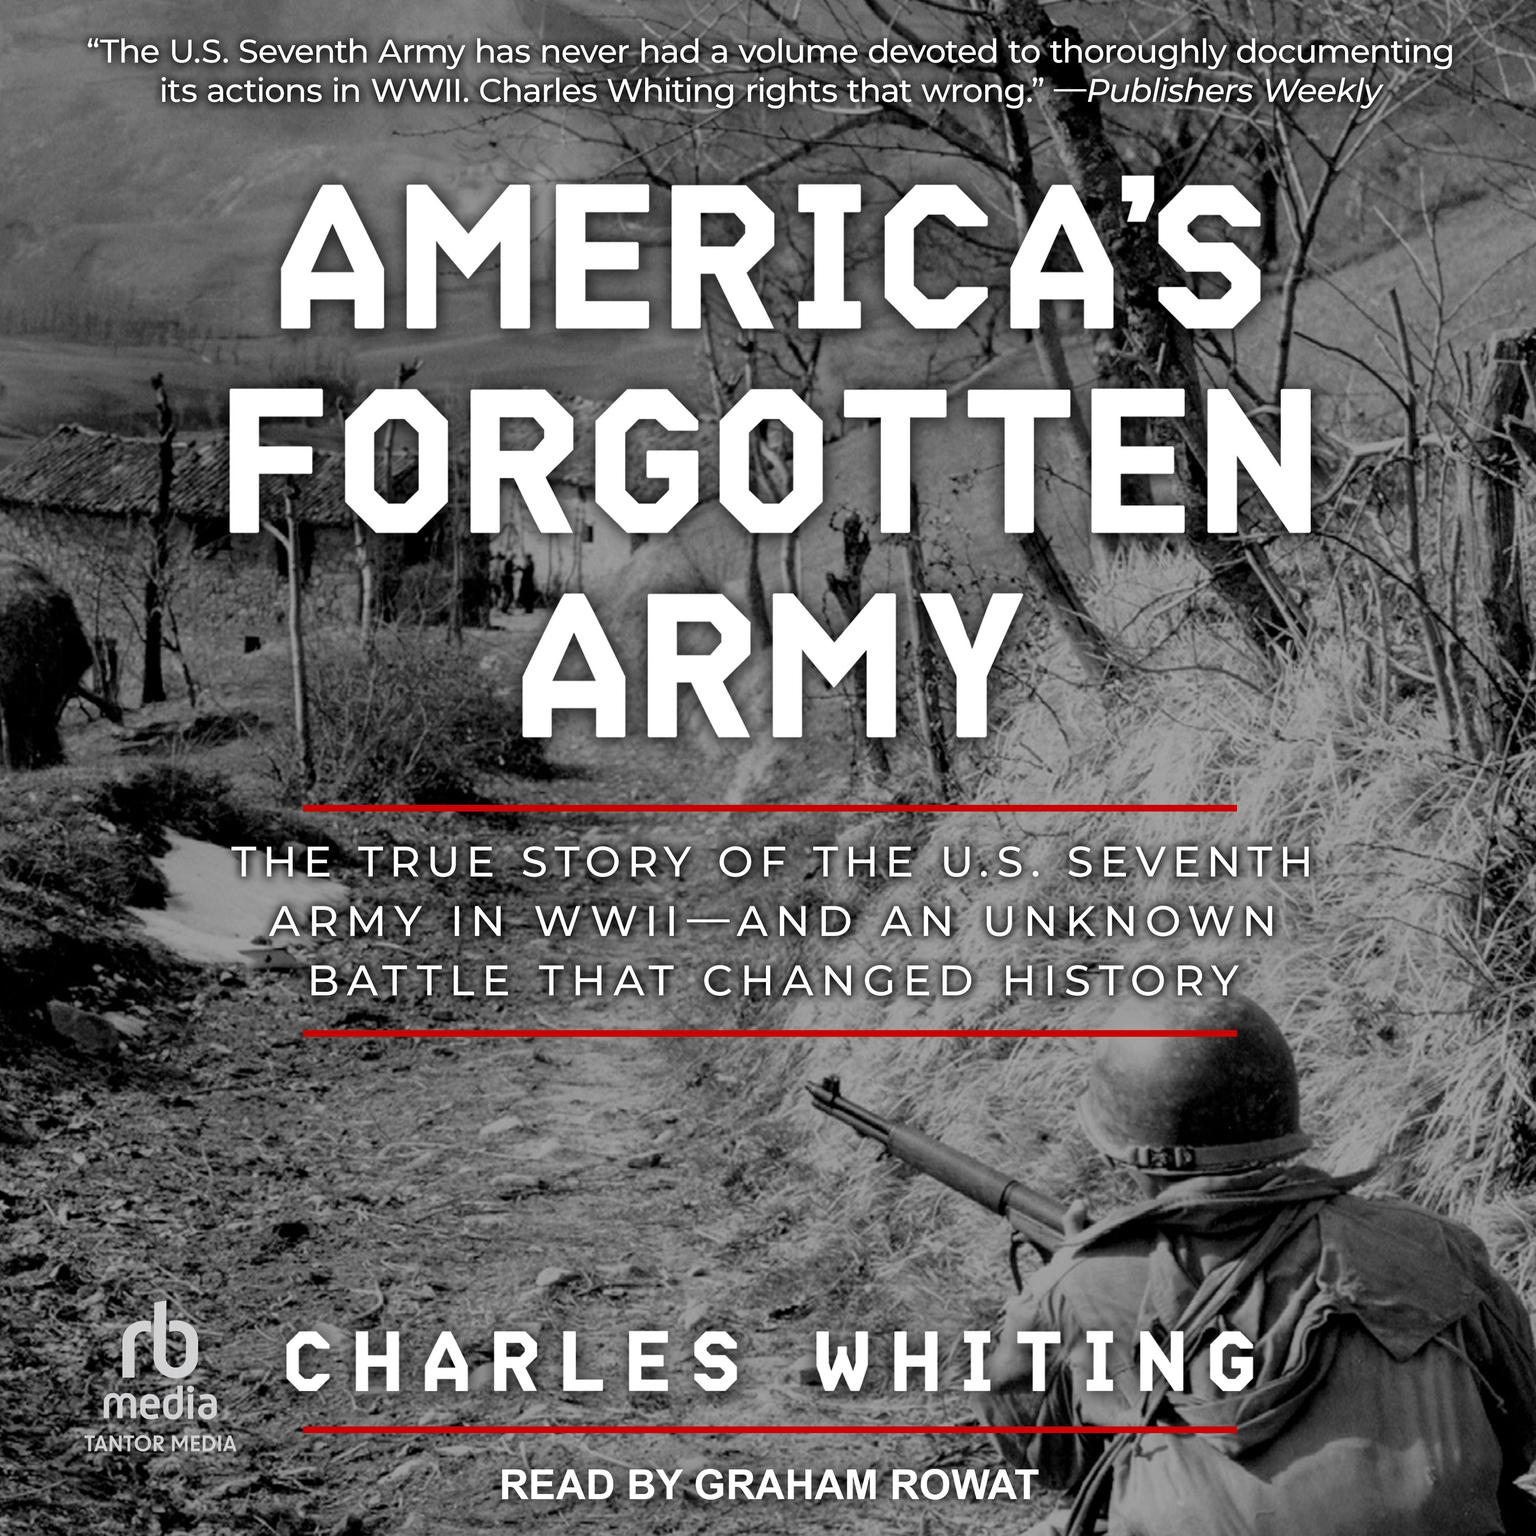 Americas Forgotten Army: The True Story of the U.S. Seventh Army in WWII - And An Unknown Battle that Changed History Audiobook, by Charles Whiting